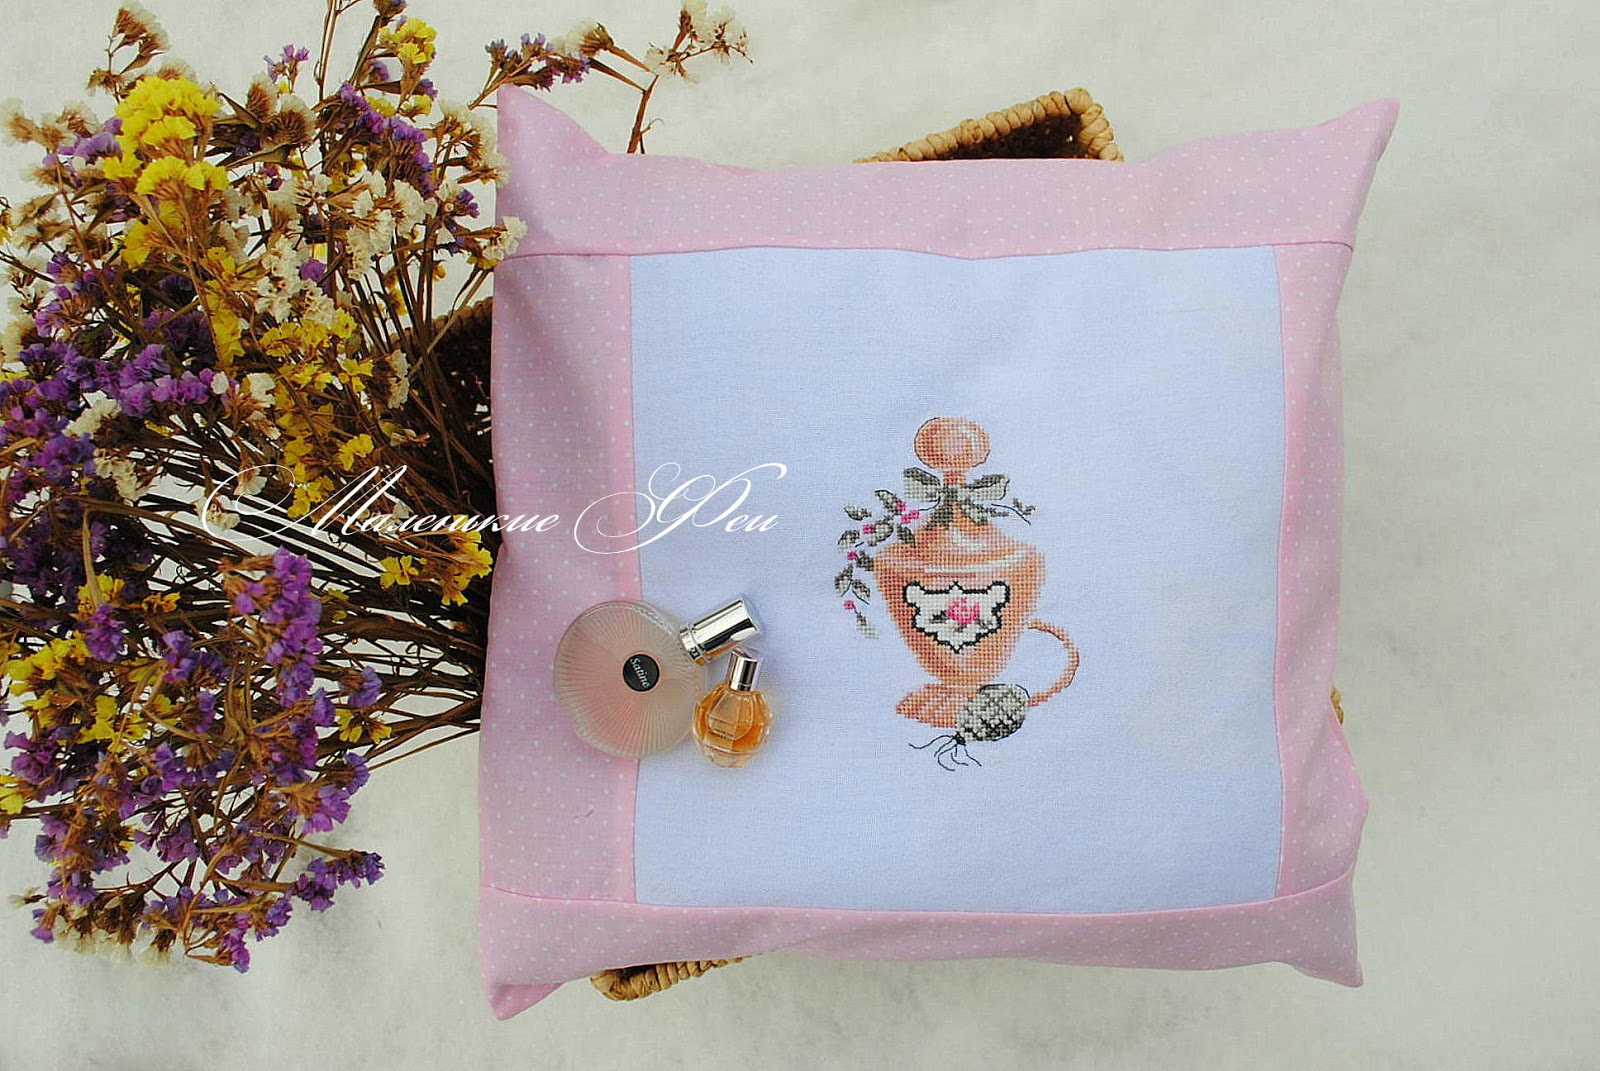 embroidery, cross-stitch, embroidery cross, log, embroidery, French stories, the French embroidery, Designed by the French, the French Designer Builder, perfume, bottle of perfume, pillow, handmade pillowcase, embroidered pillow, embroidered pillow case, pillow handmade, rose, roses, pink